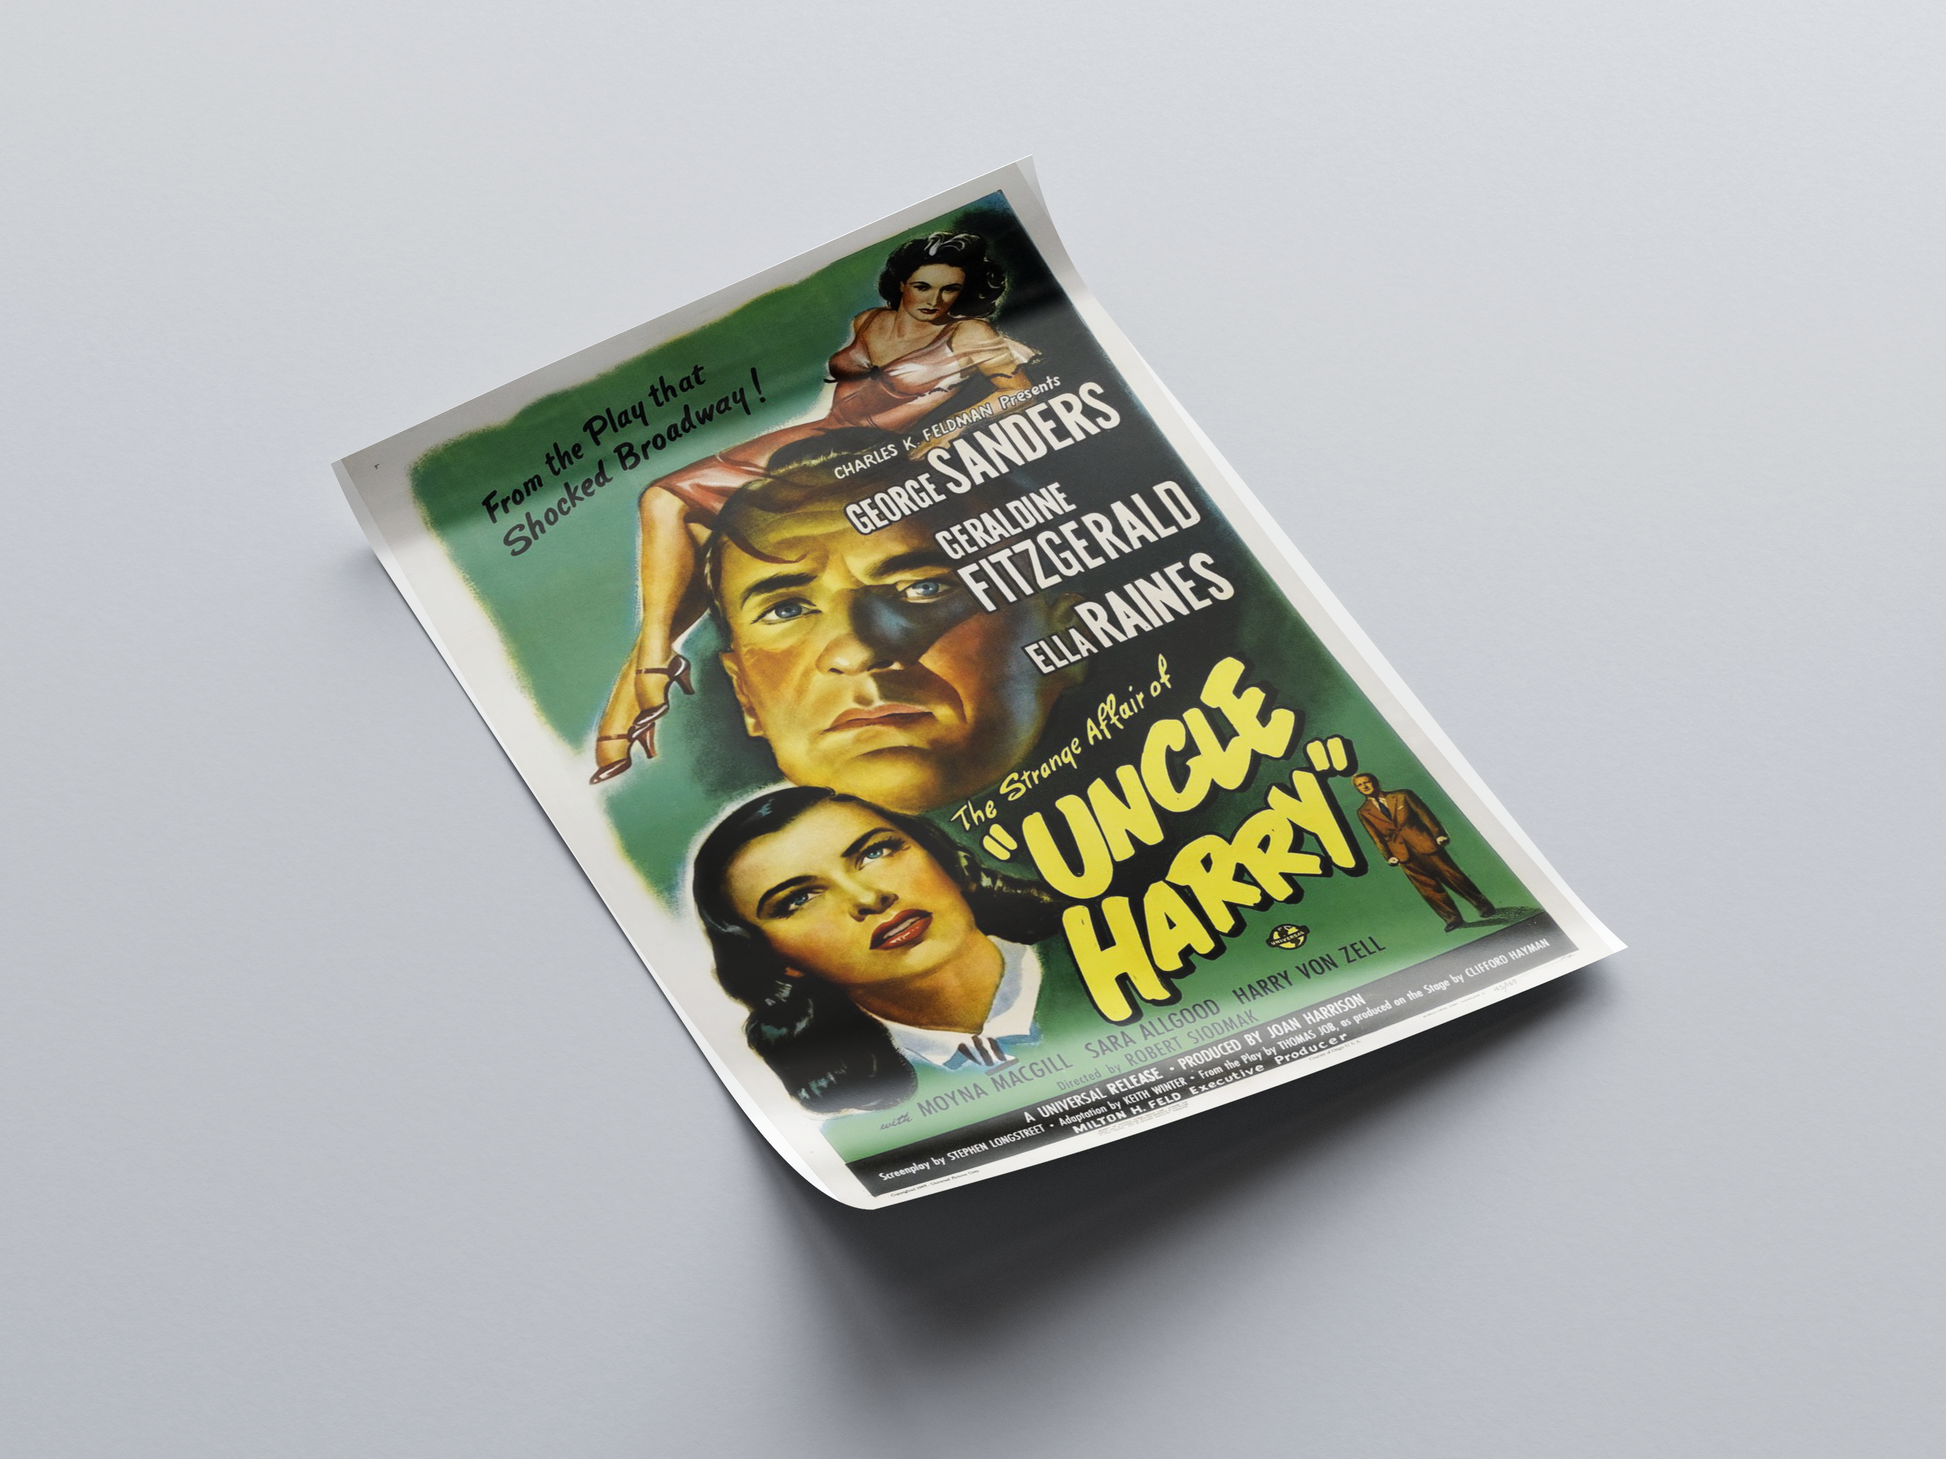 The Strange Affair of Uncle Harry (1945) Movie Poster displayed in interior setting